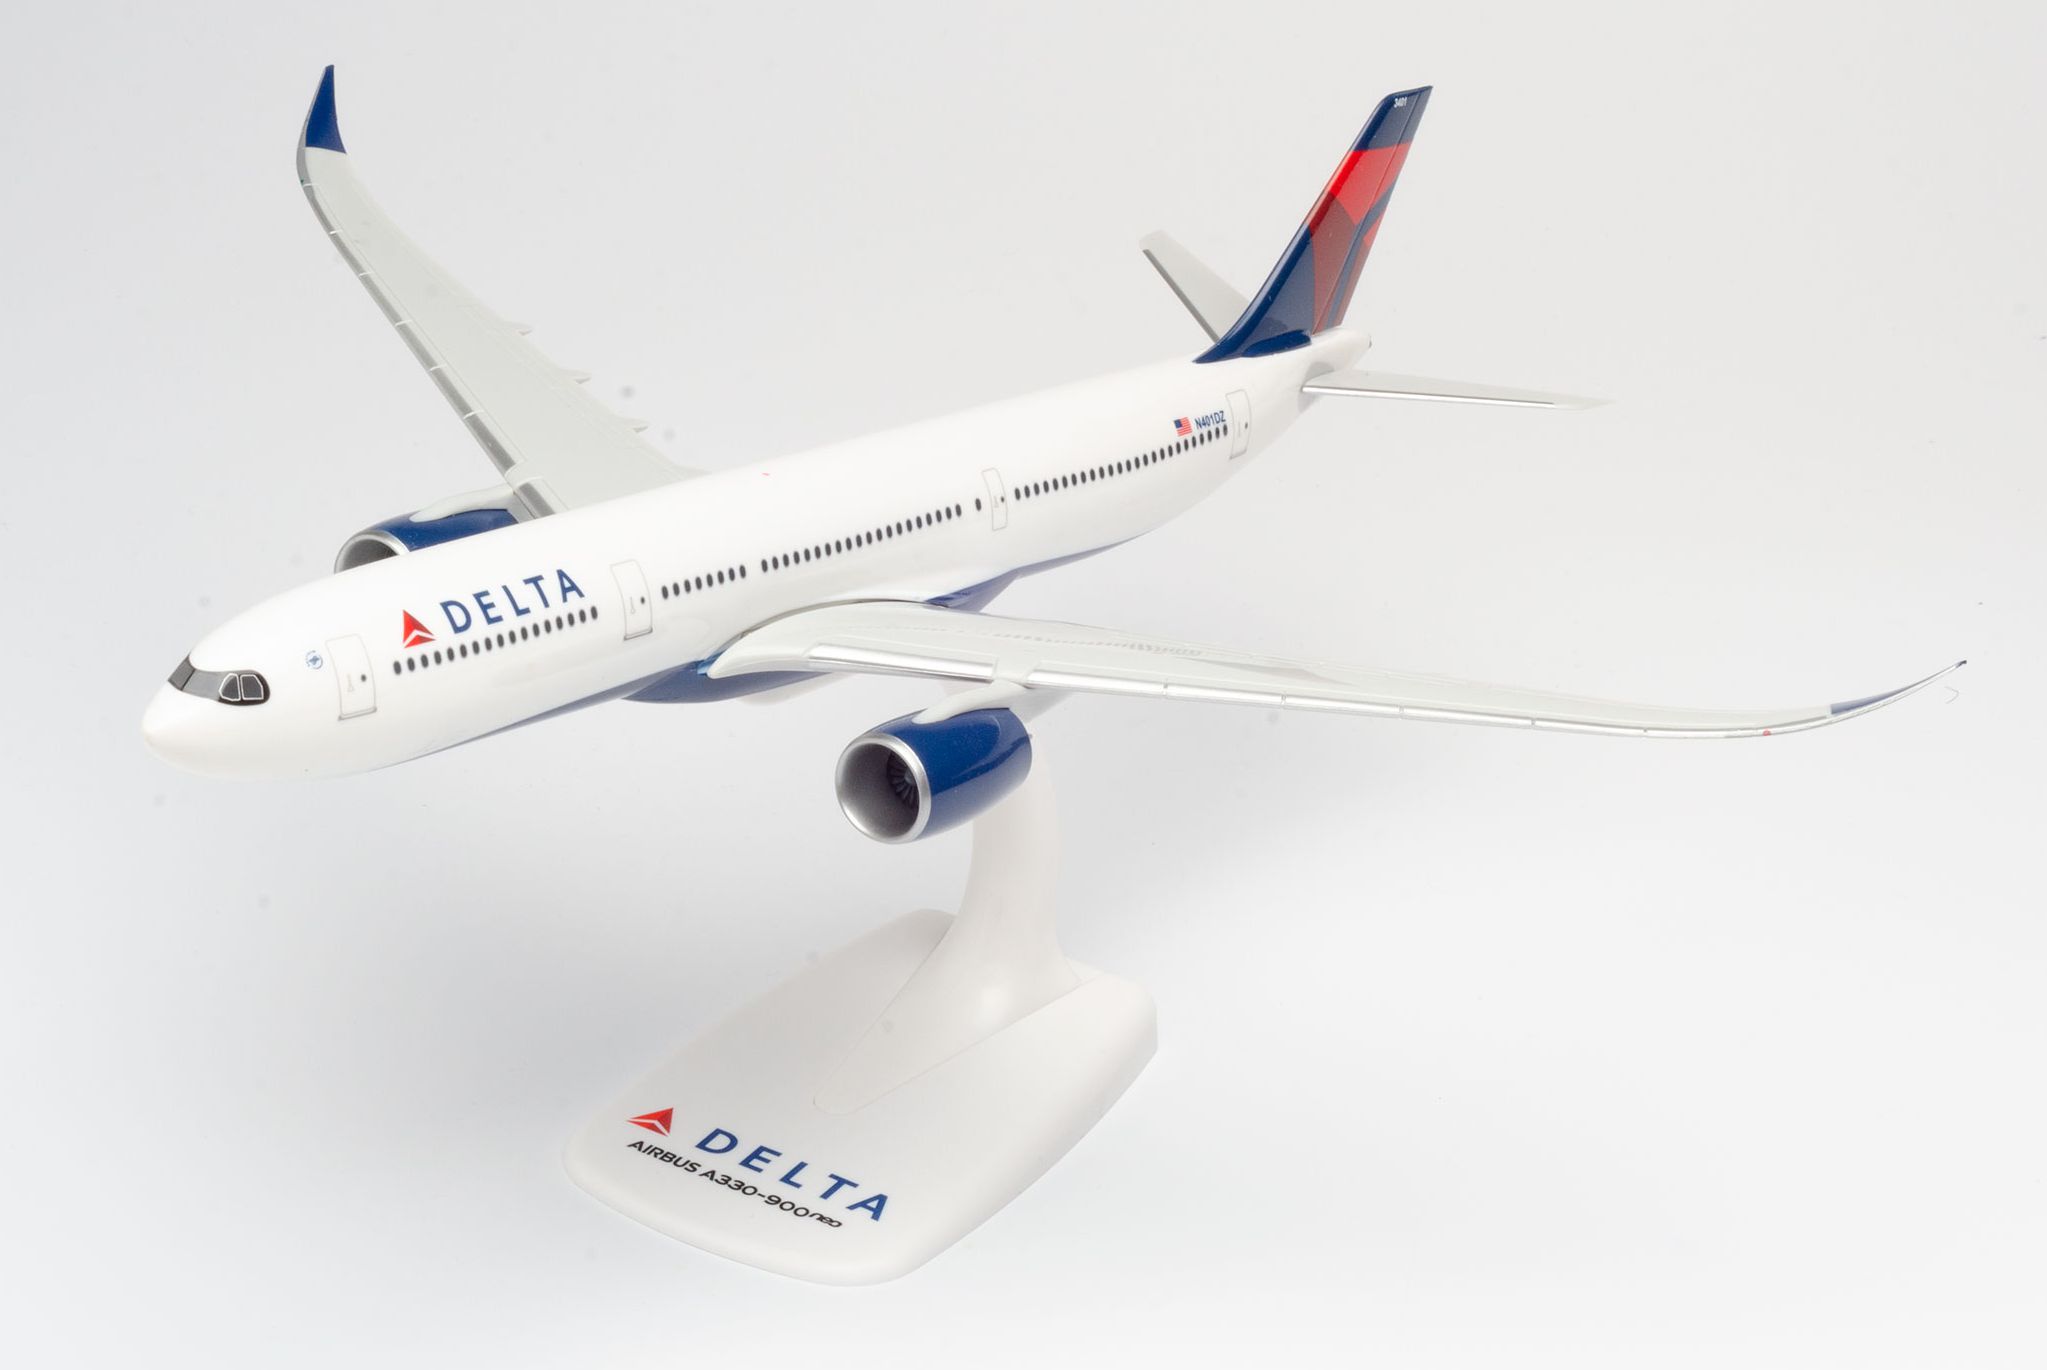 Herpa 612388 - Delta Air Lines Airbus A330-900 neo